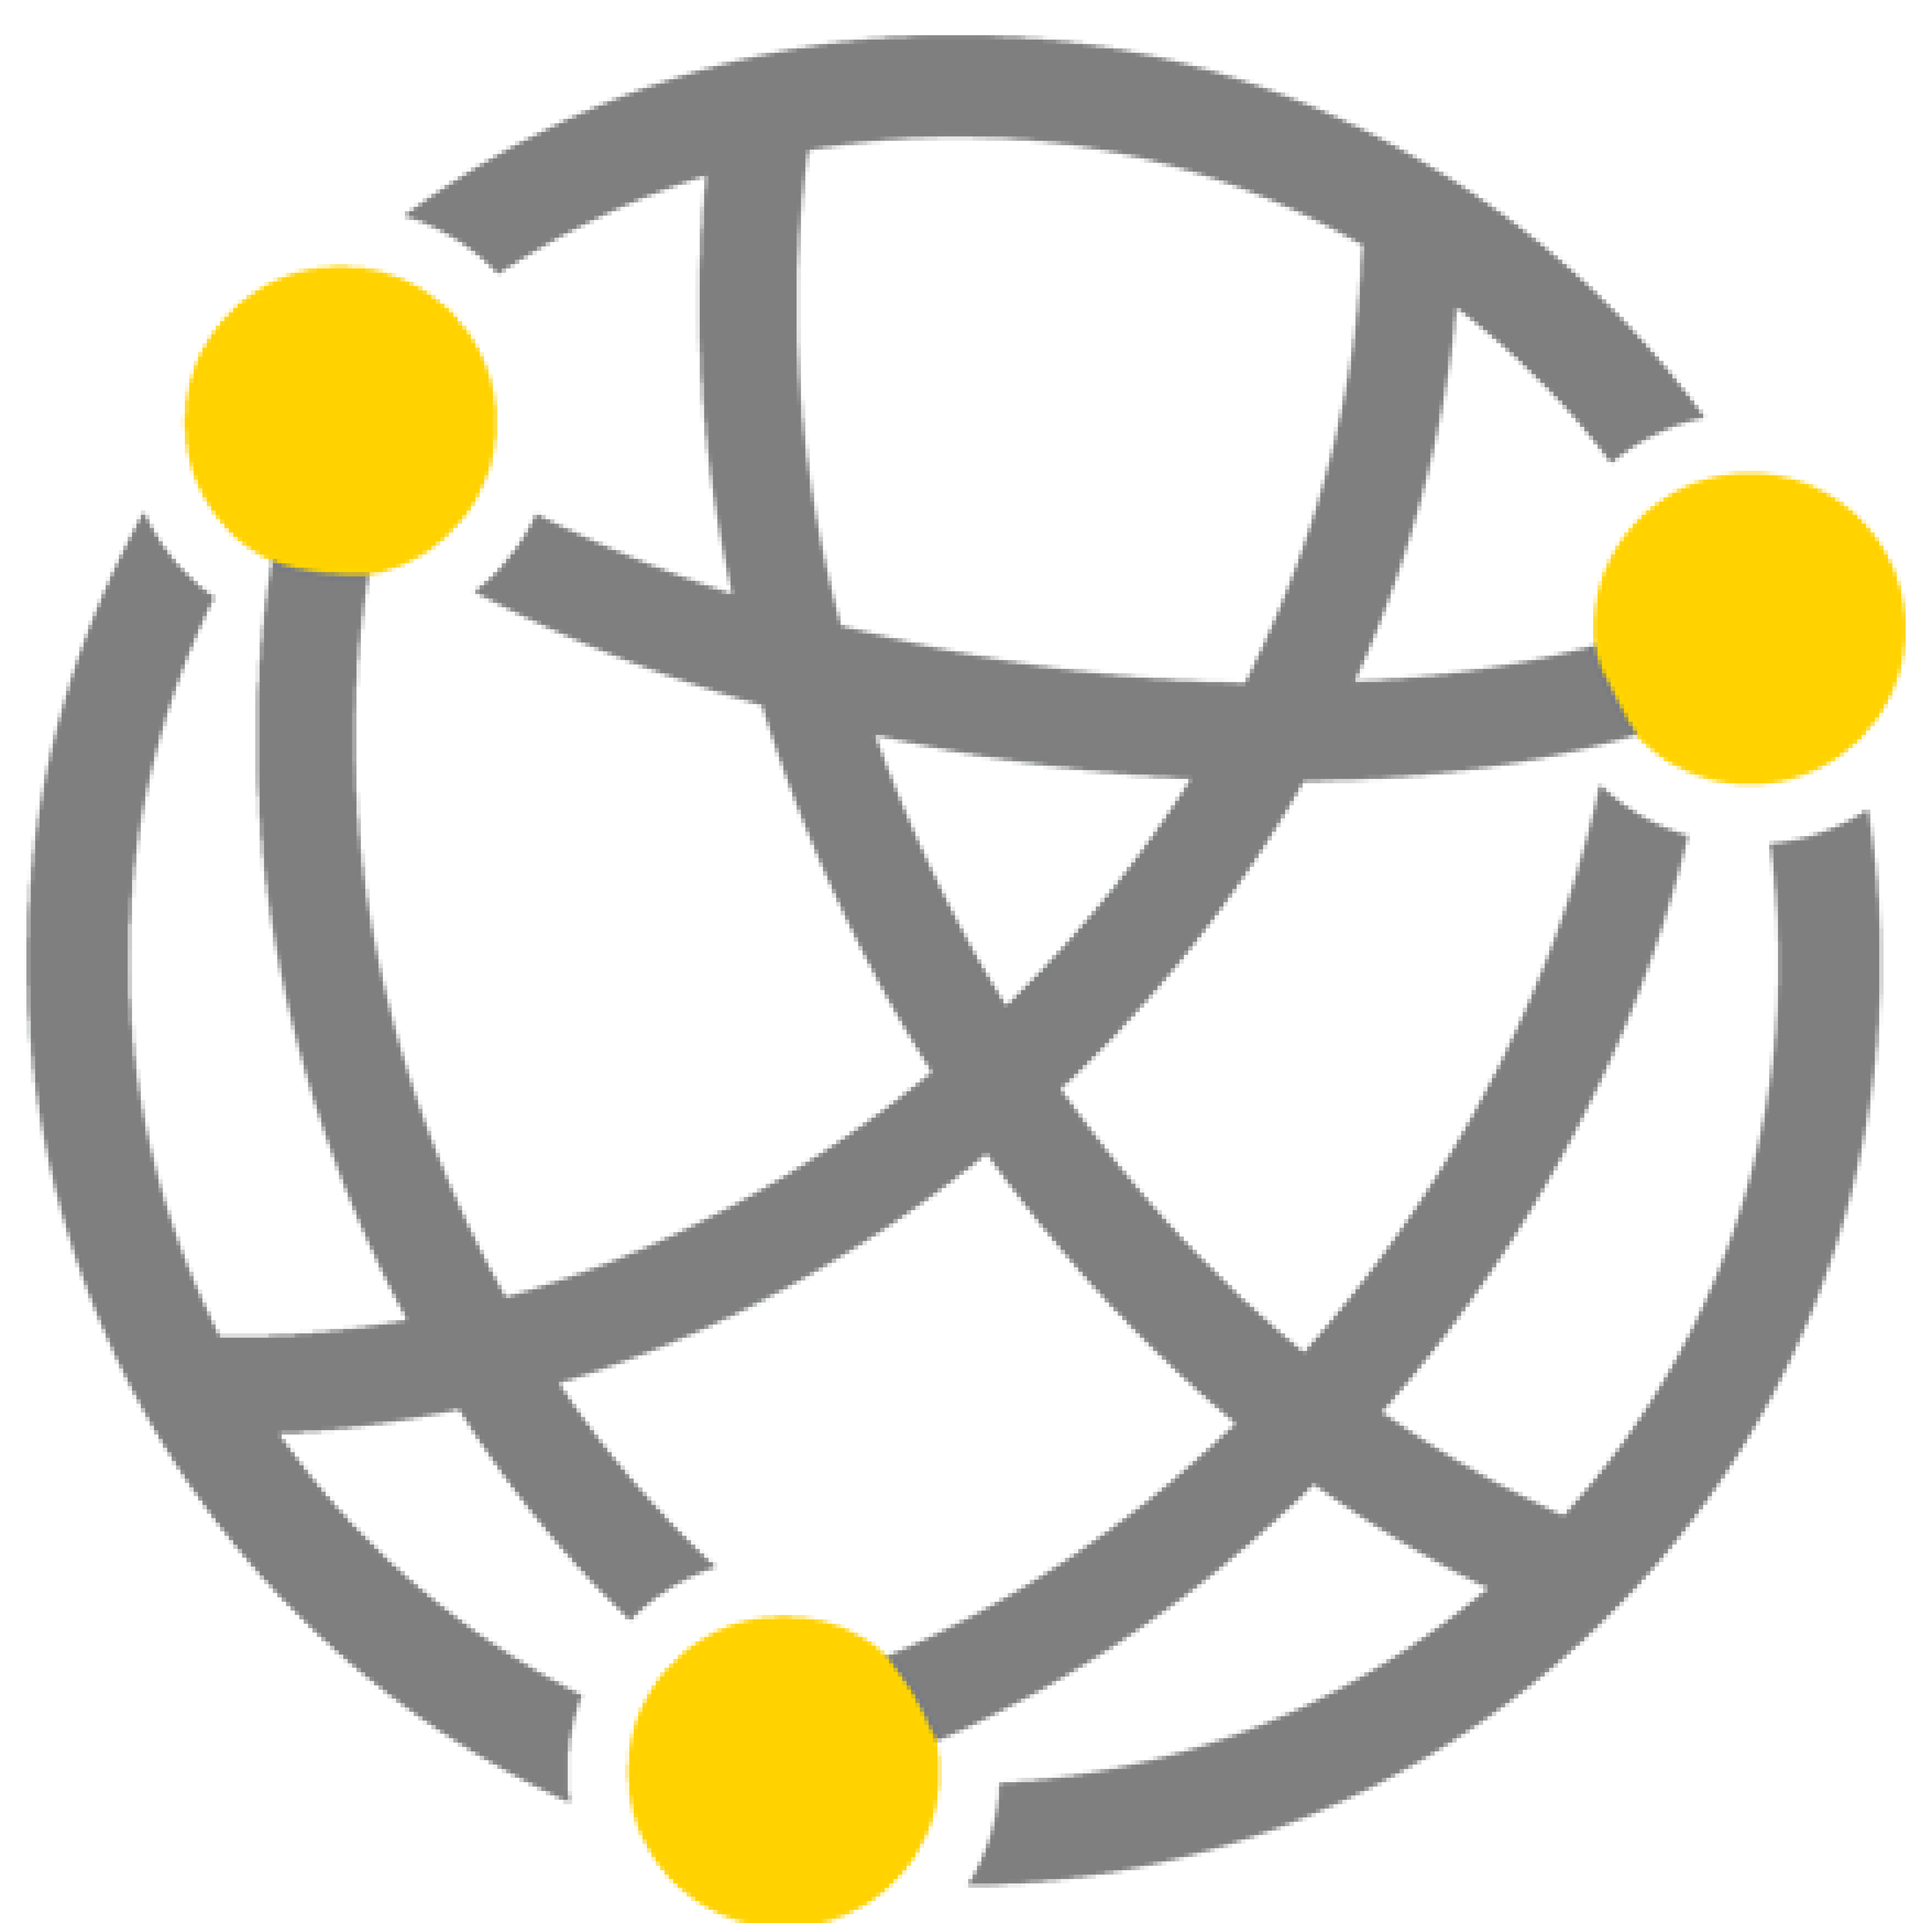 An icon of a globe with connected yellow dots